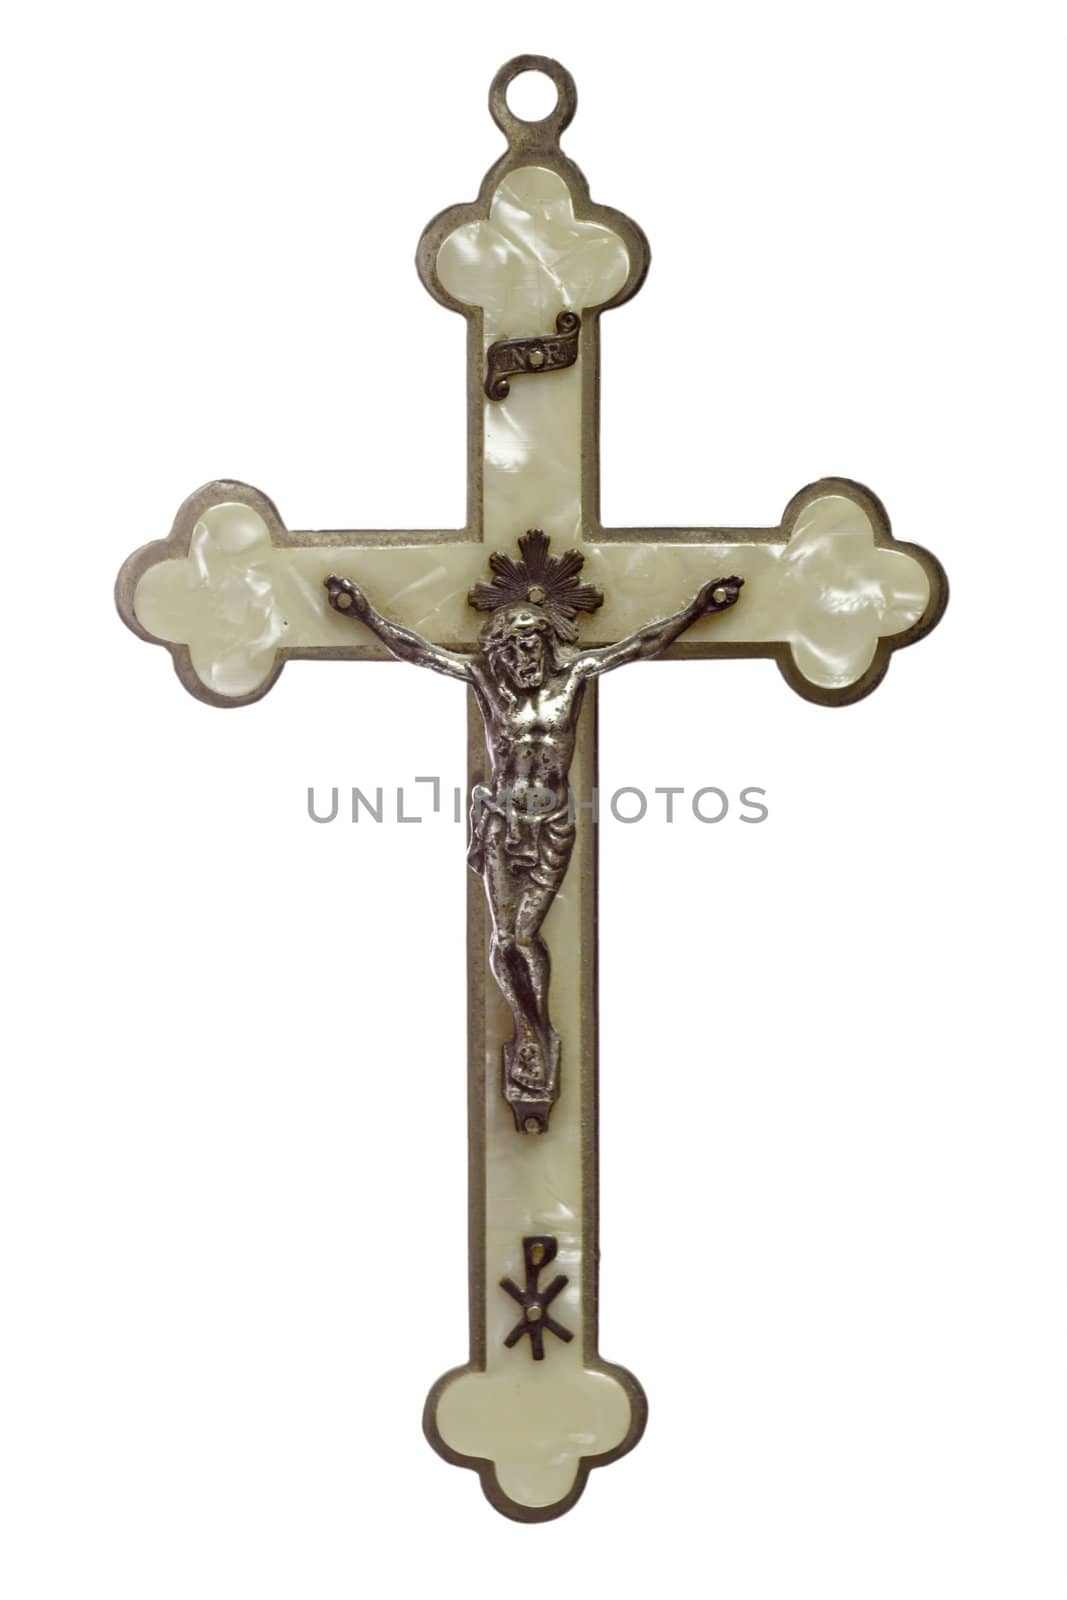 A a crucifix isolated on white background